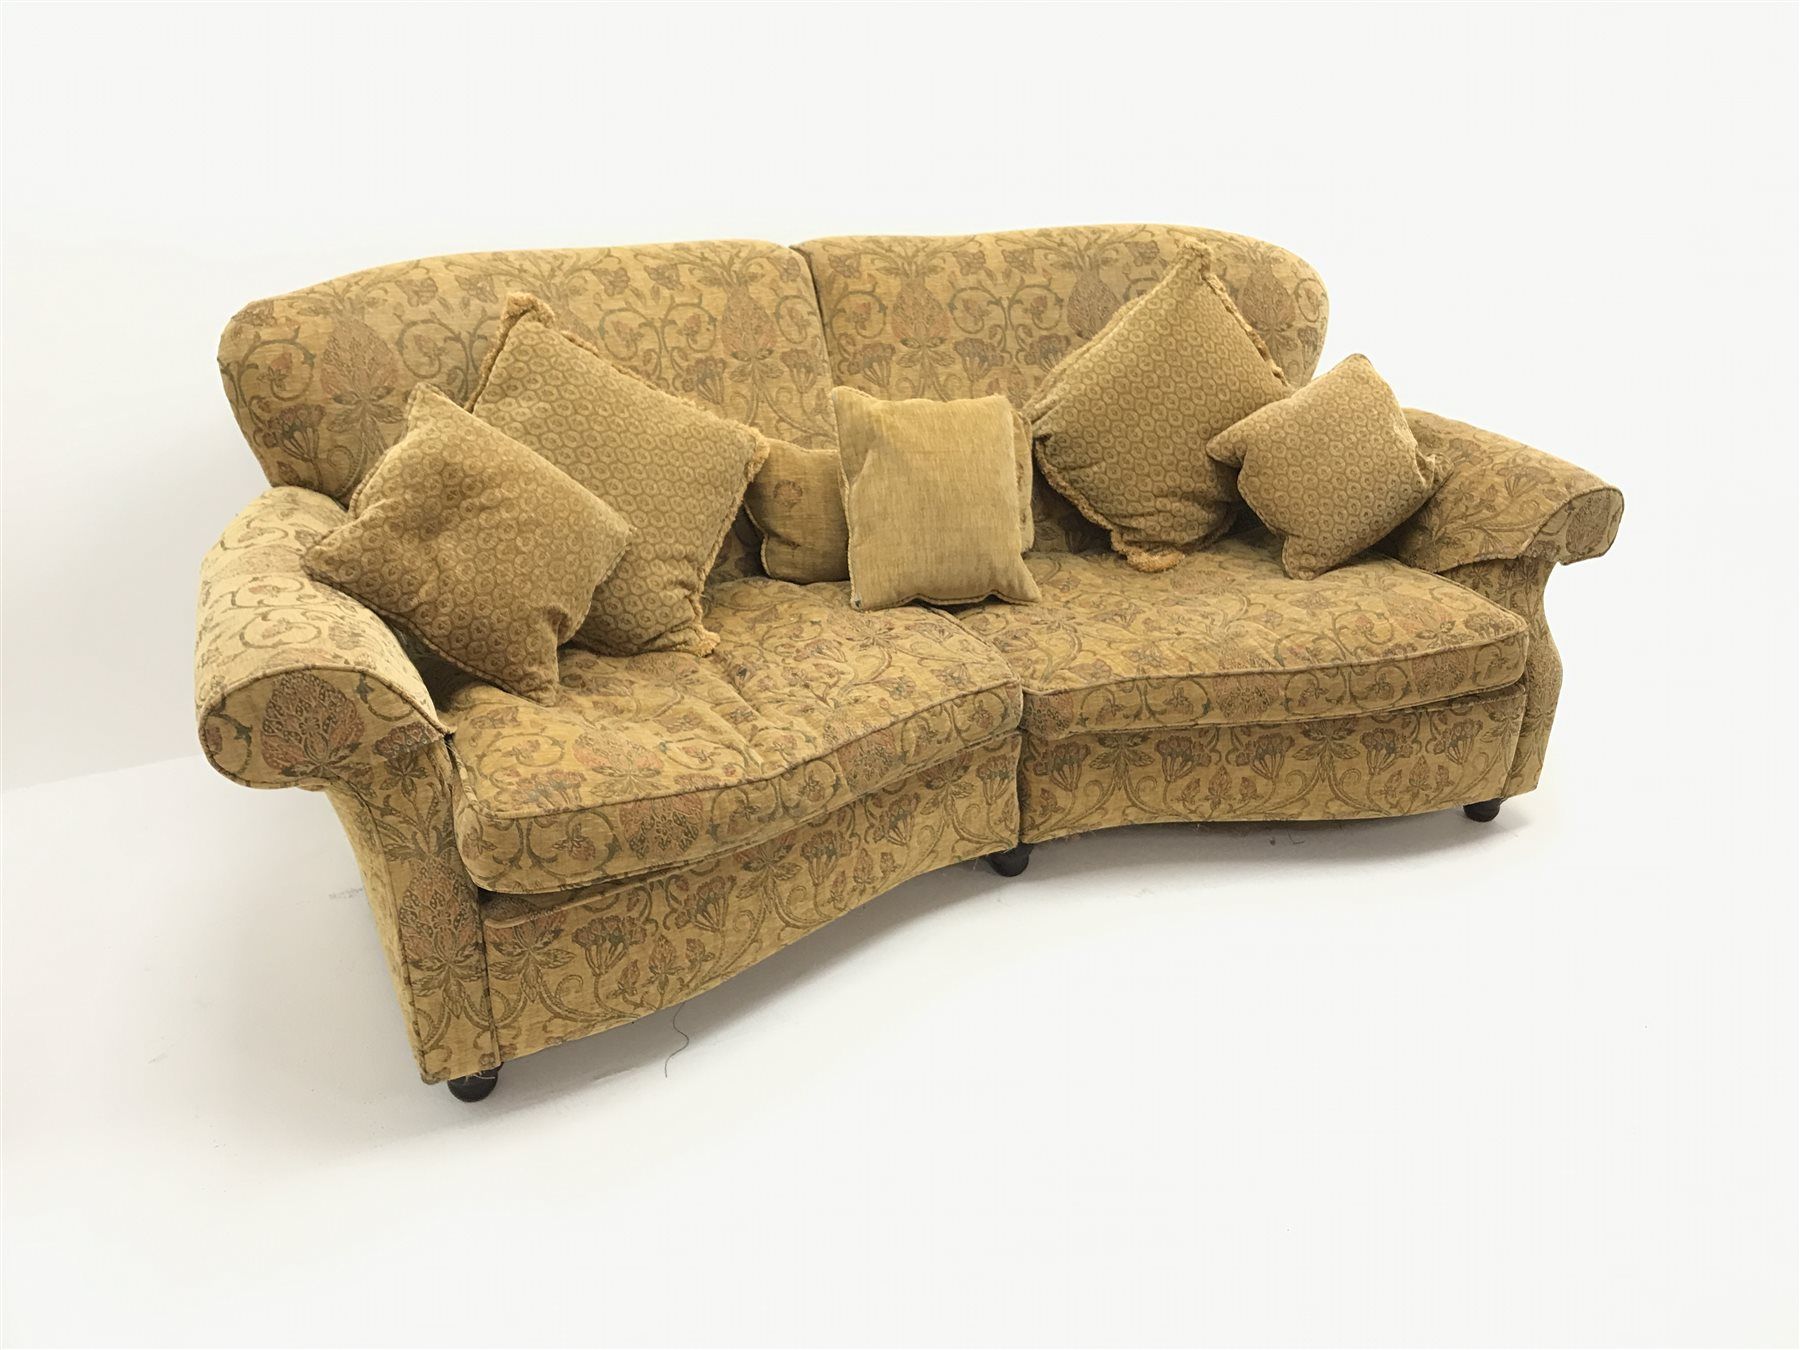 Three Seat Curved Traditional Sofa, Scrolled Arms, Upholstered In A With Regard To Traditional 3 Seater Sofas (Gallery 7 of 20)